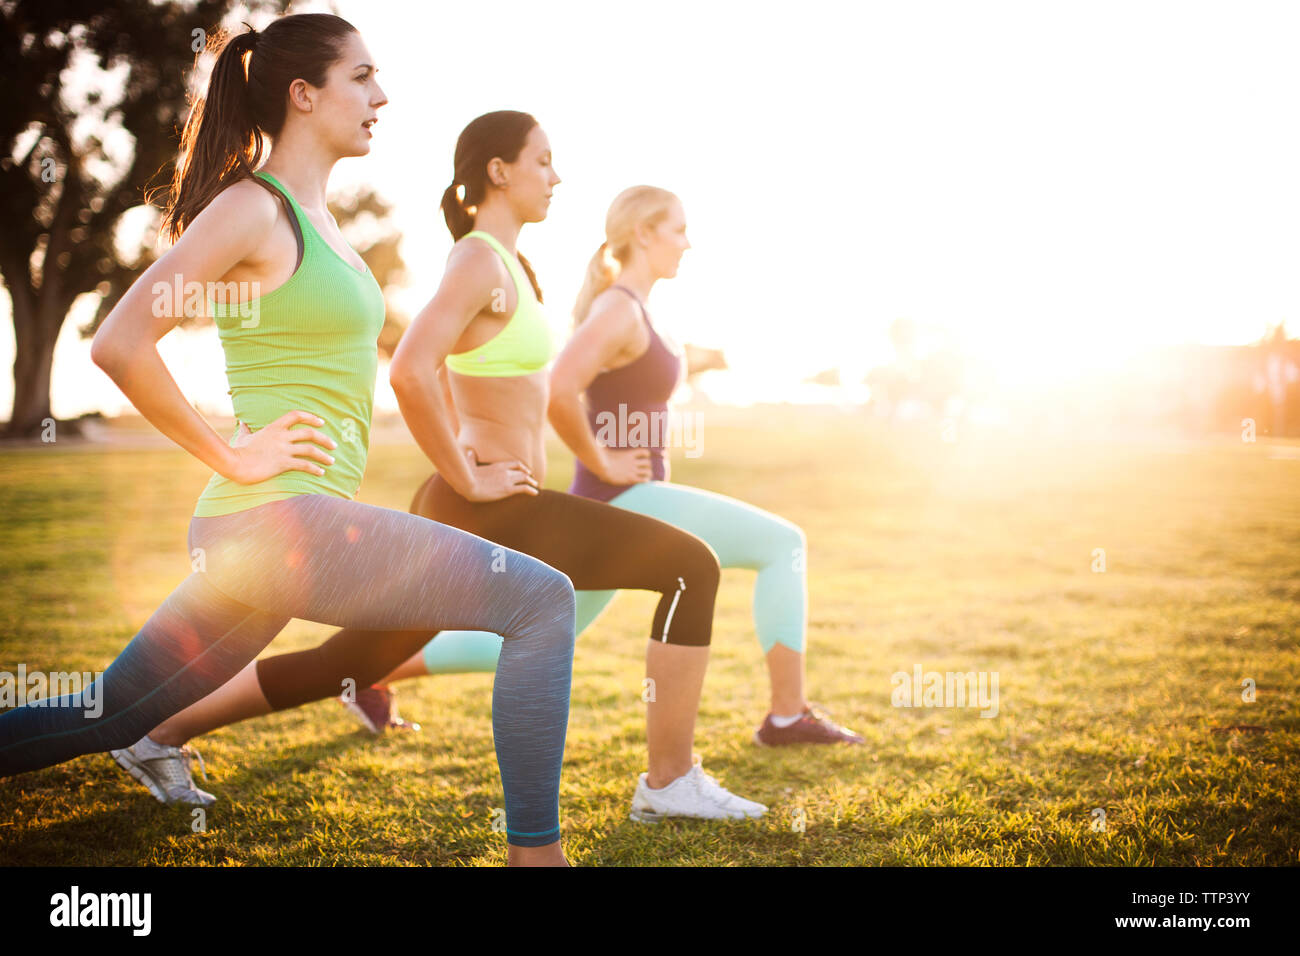 Women exercising on grassy field on sunny day Stock Photo